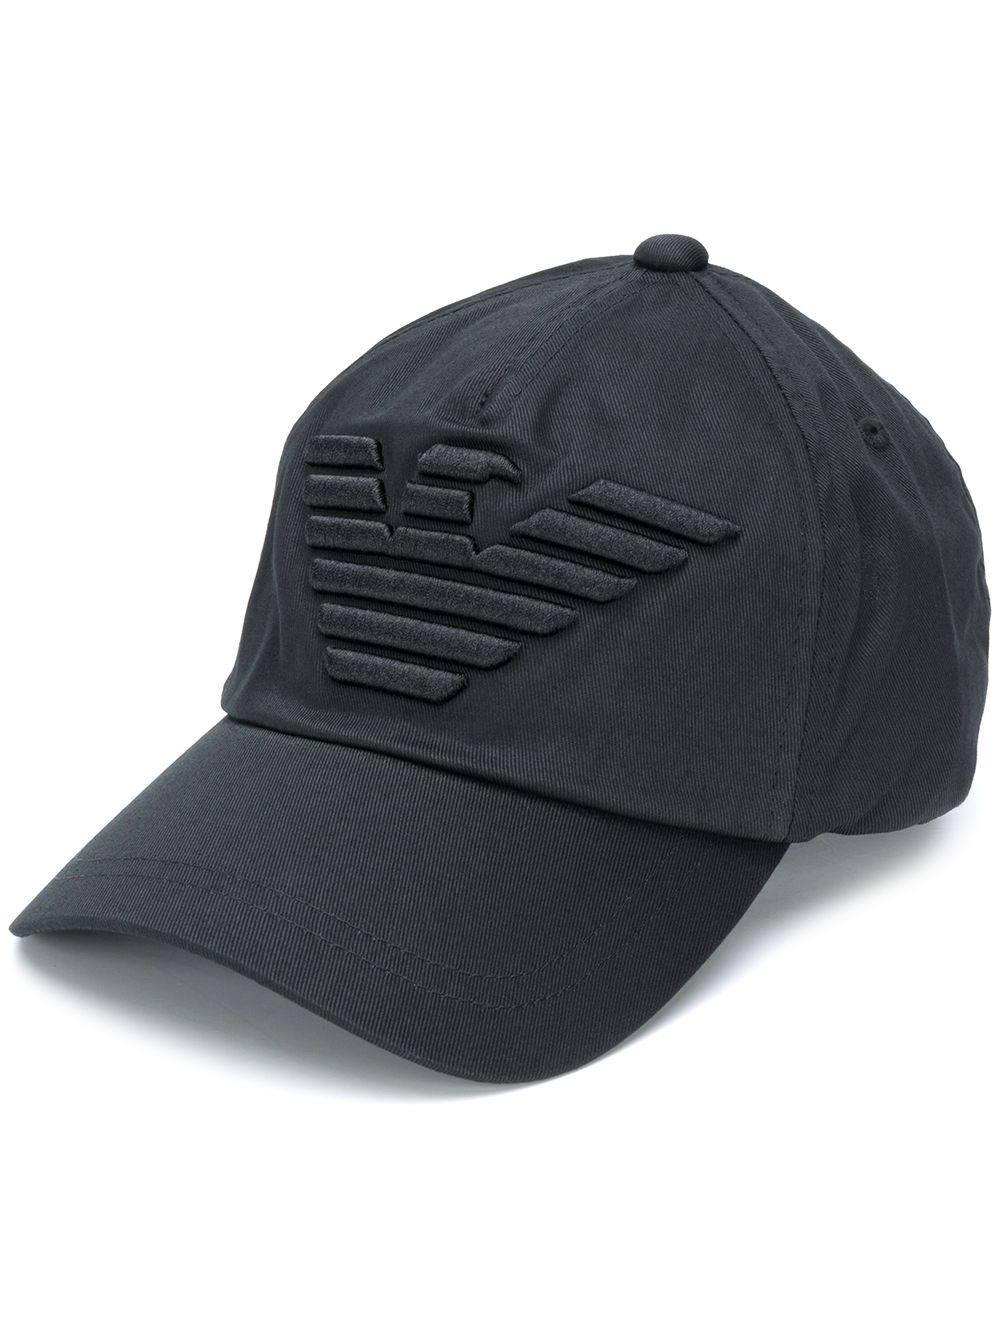 black hat with embroidered logo